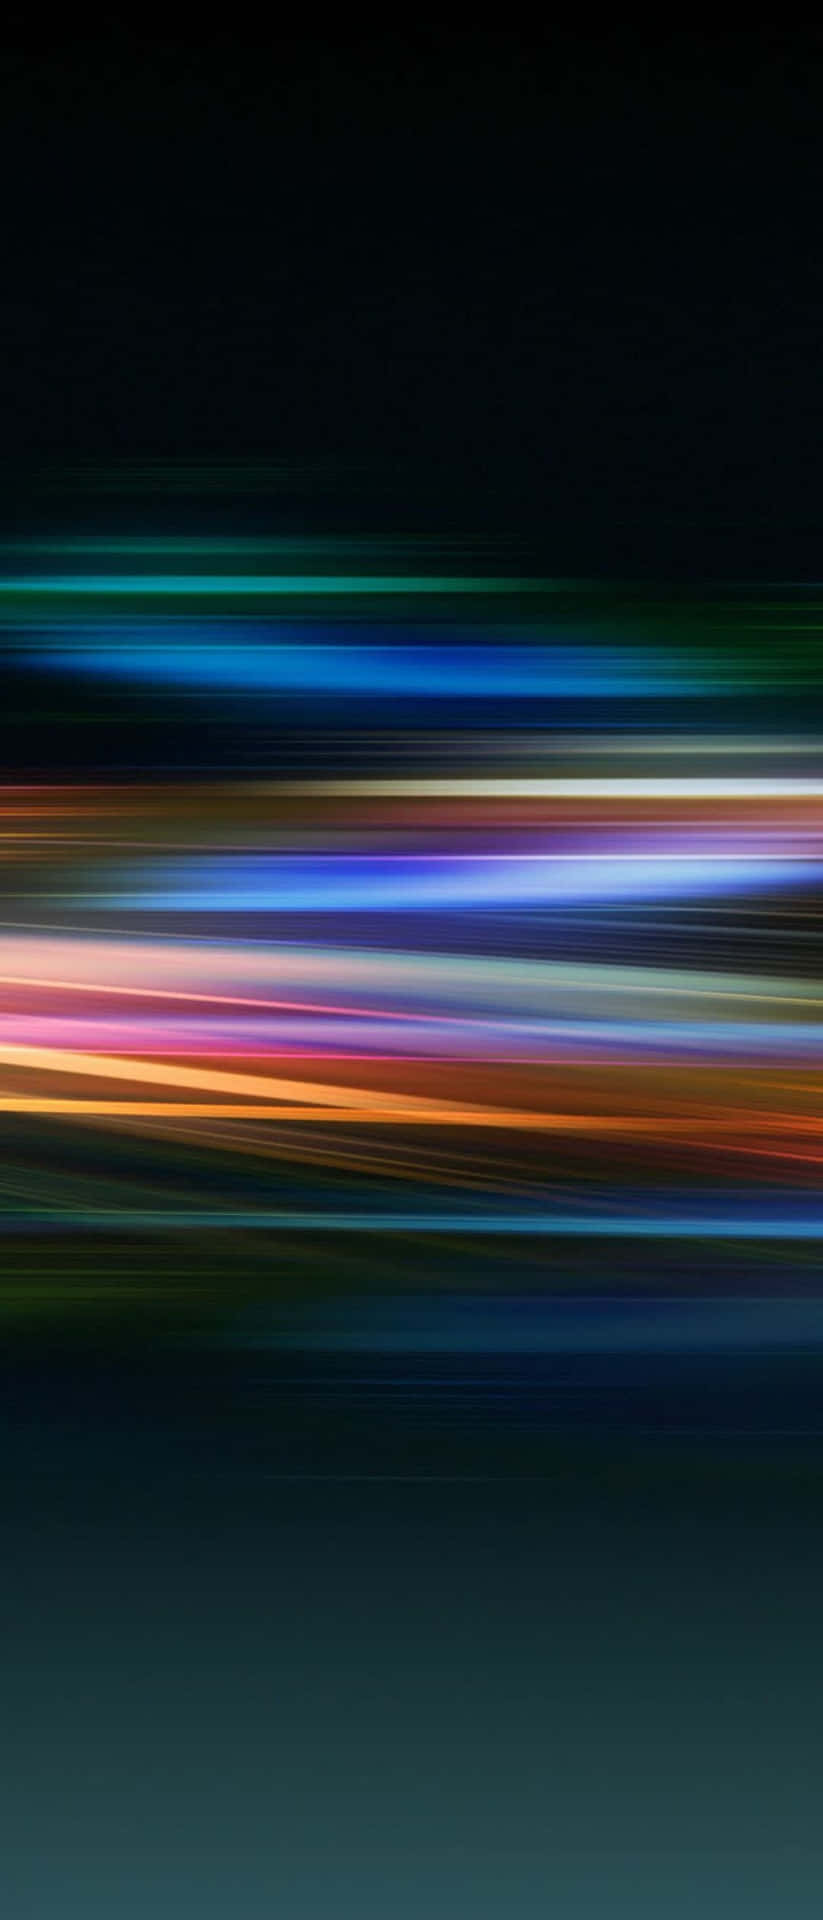 A Colorful Abstract Image Of A Light Streak Wallpaper